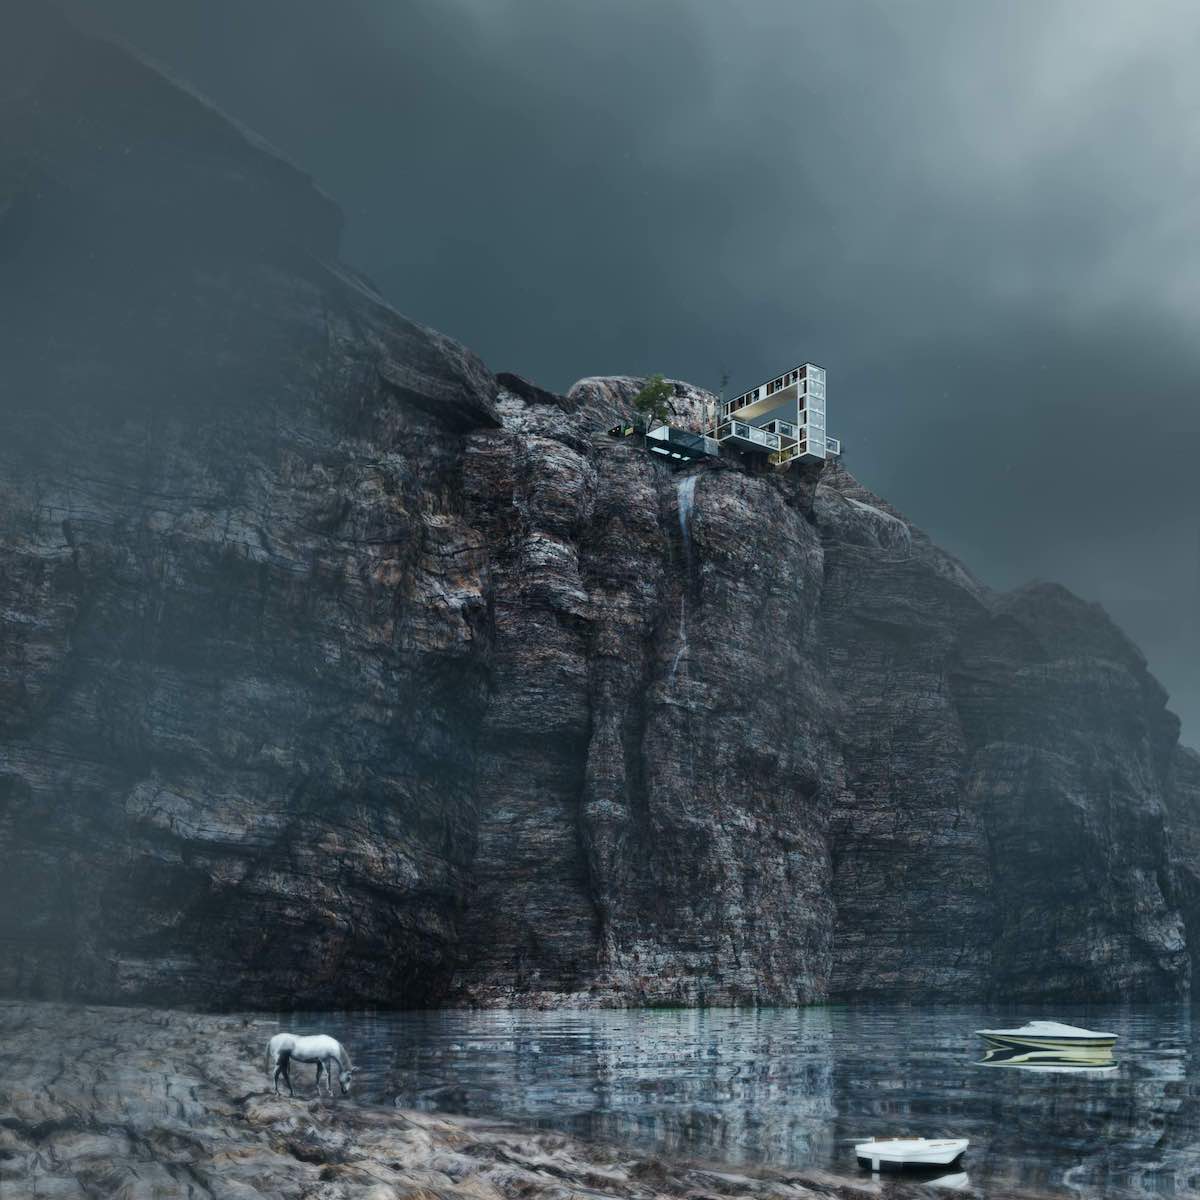 404 error page deisgn example #179: Daring Architectural Concept Perches a House on the Side of a Rocky Cliff